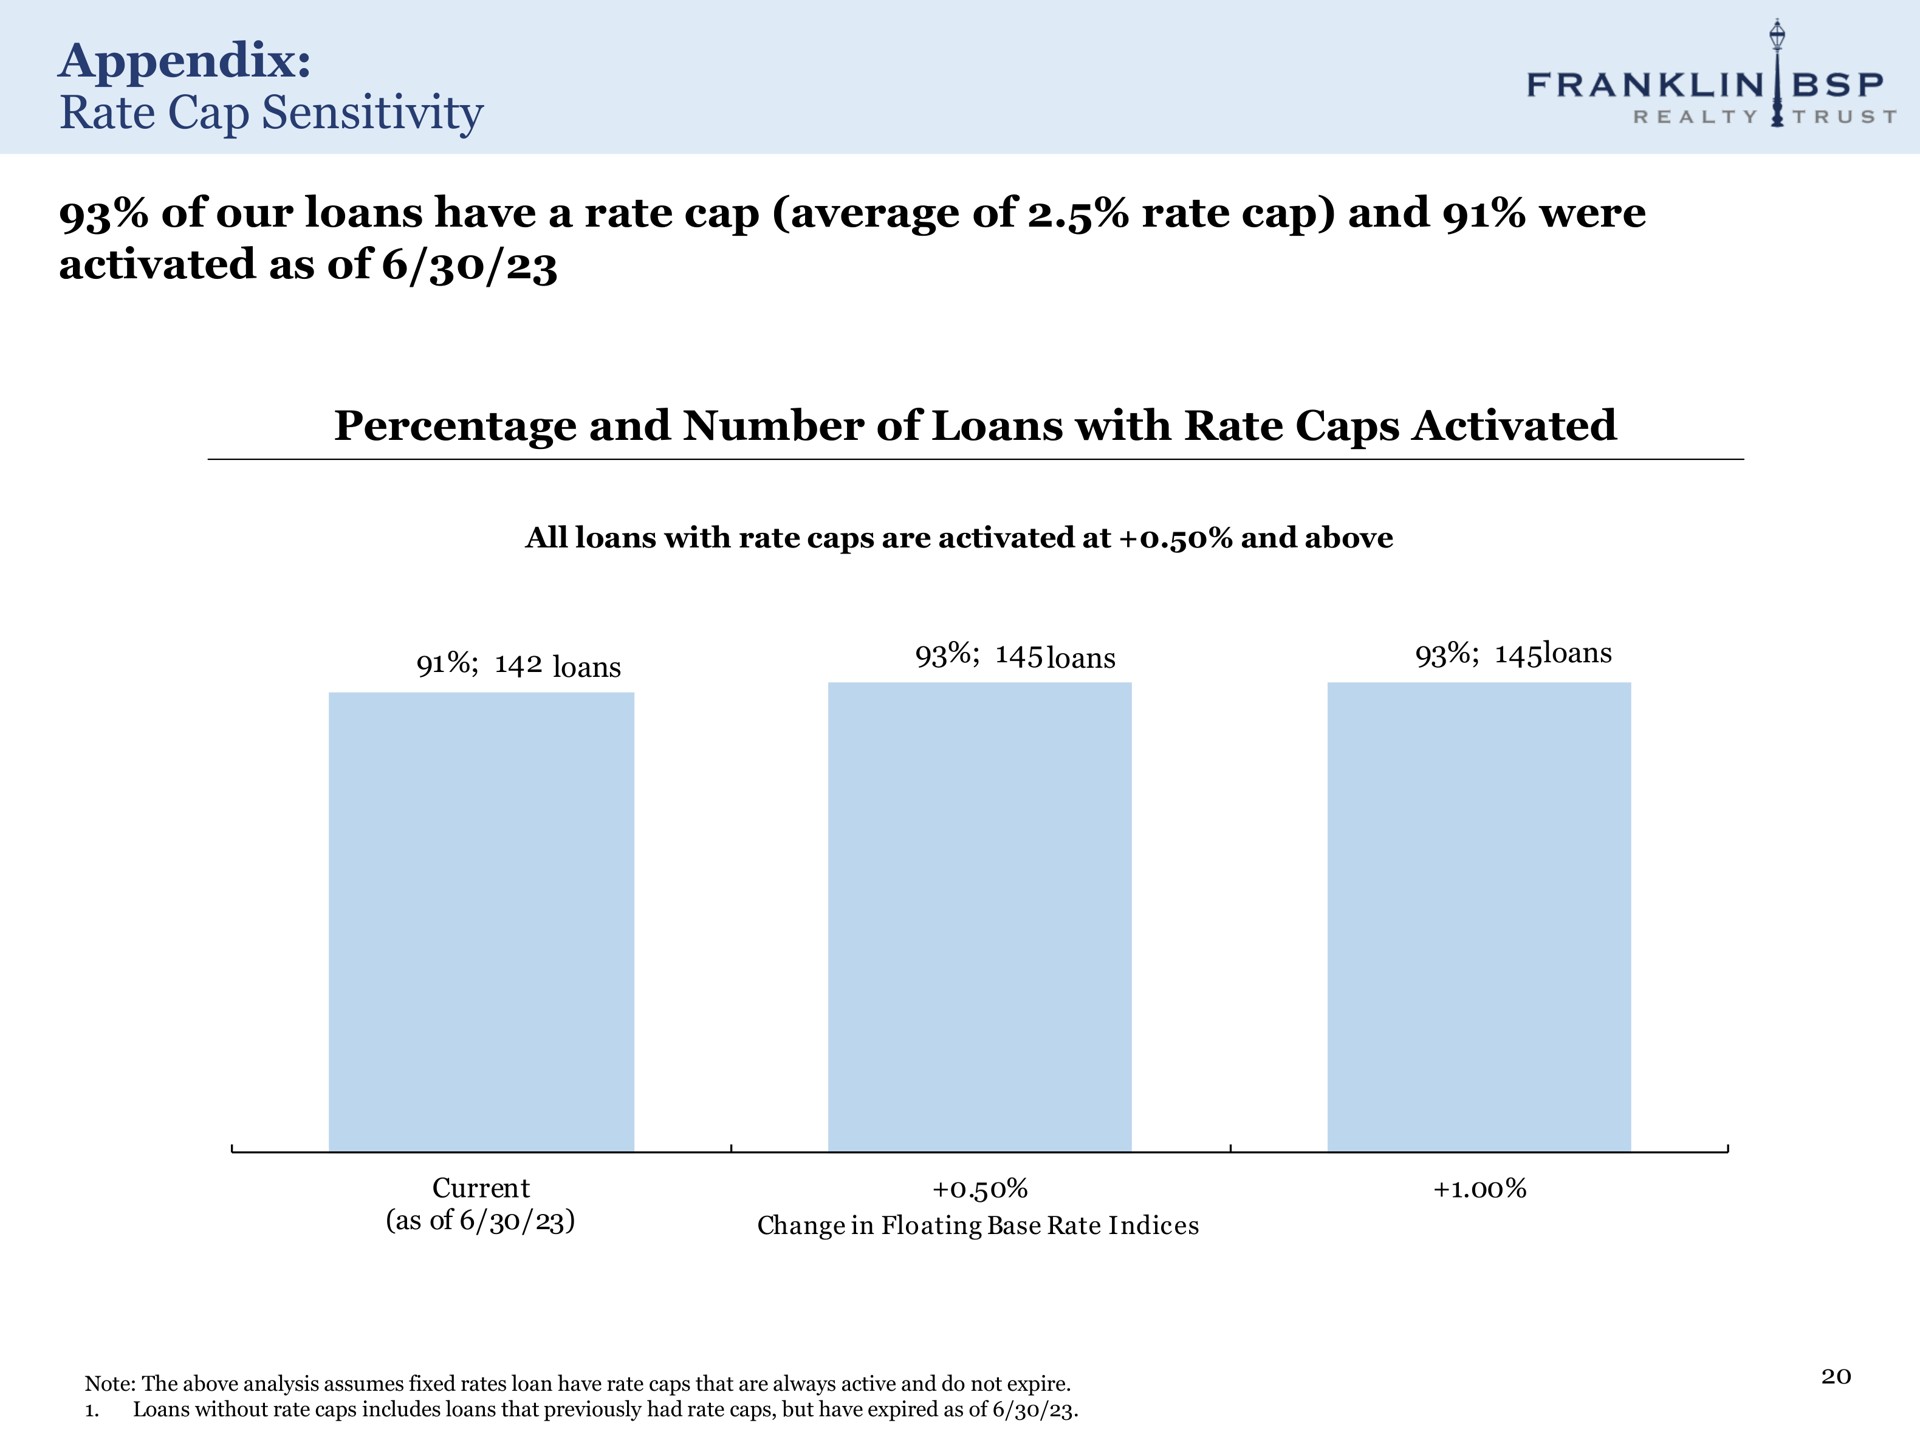 appendix rate cap sensitivity of our loans have a rate cap average of rate cap and were activated as of percentage and number of loans with rate caps activated pee franklin | Franklin BSP Realty Trust